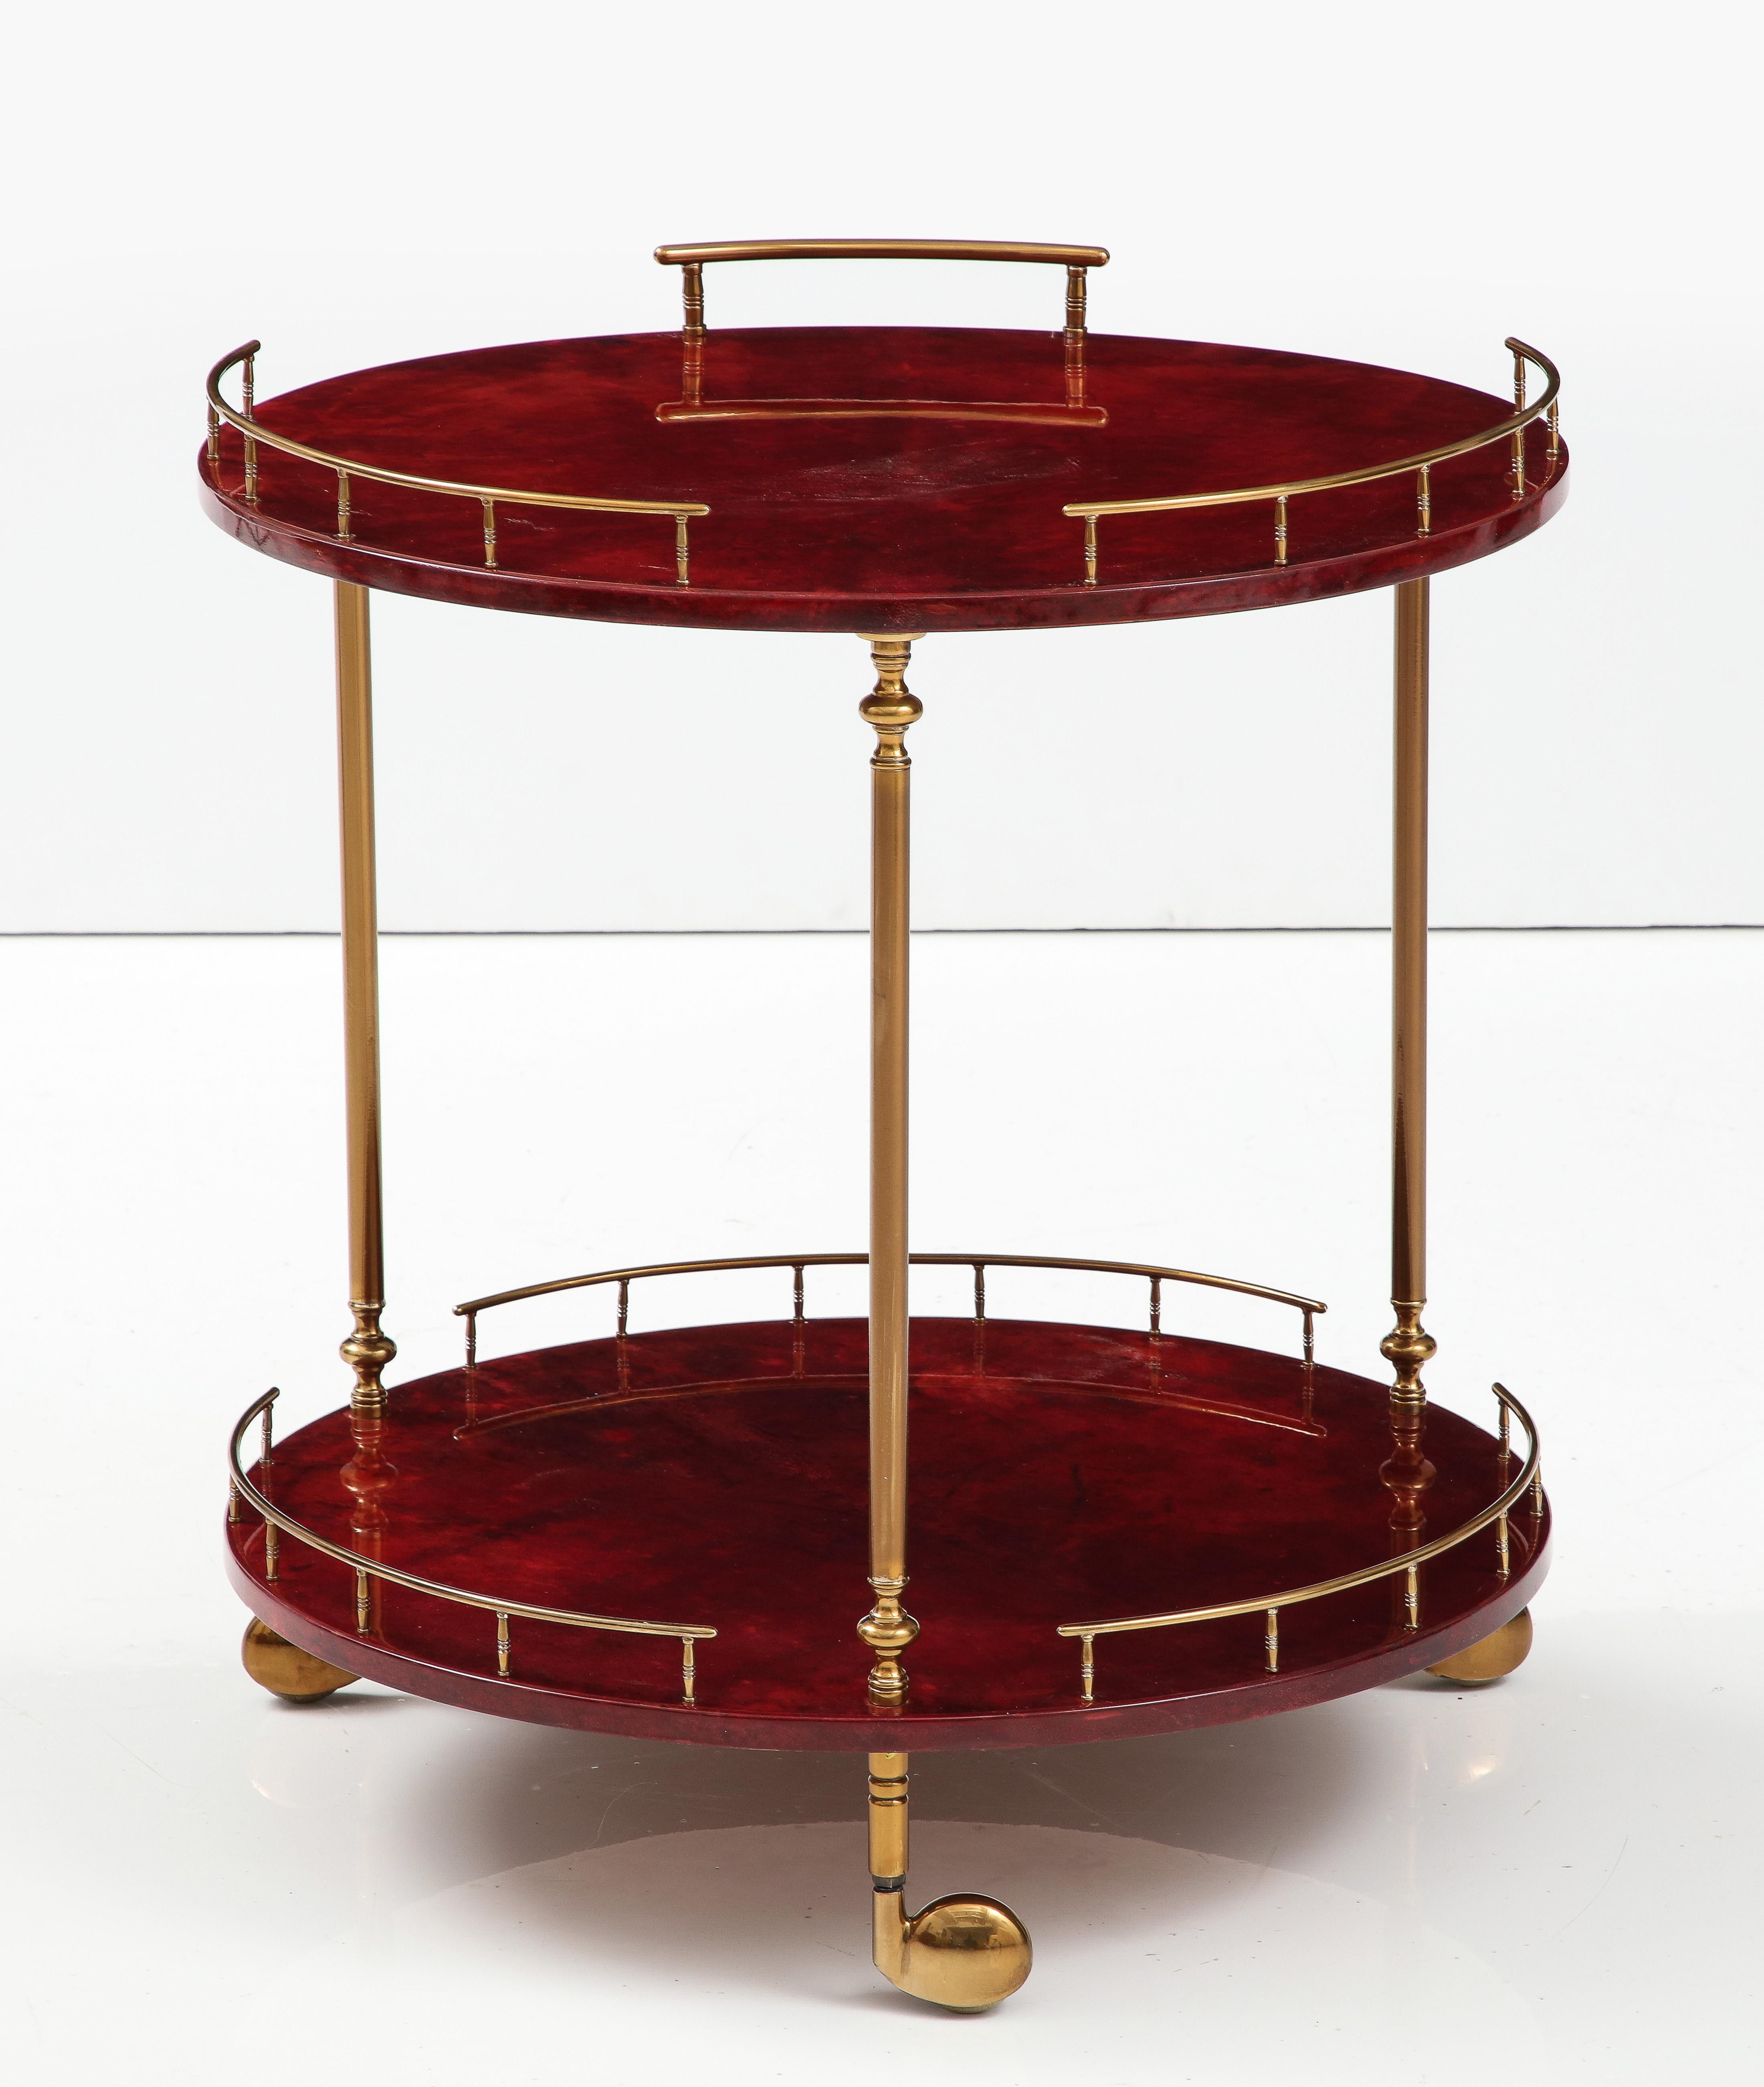 Modern classic 2 tier bar cart by Aldo Turn. The 2 level cart features Ruby Red/Cranberry dyed goatskin all supported by brass supports and castors. All mint restored.